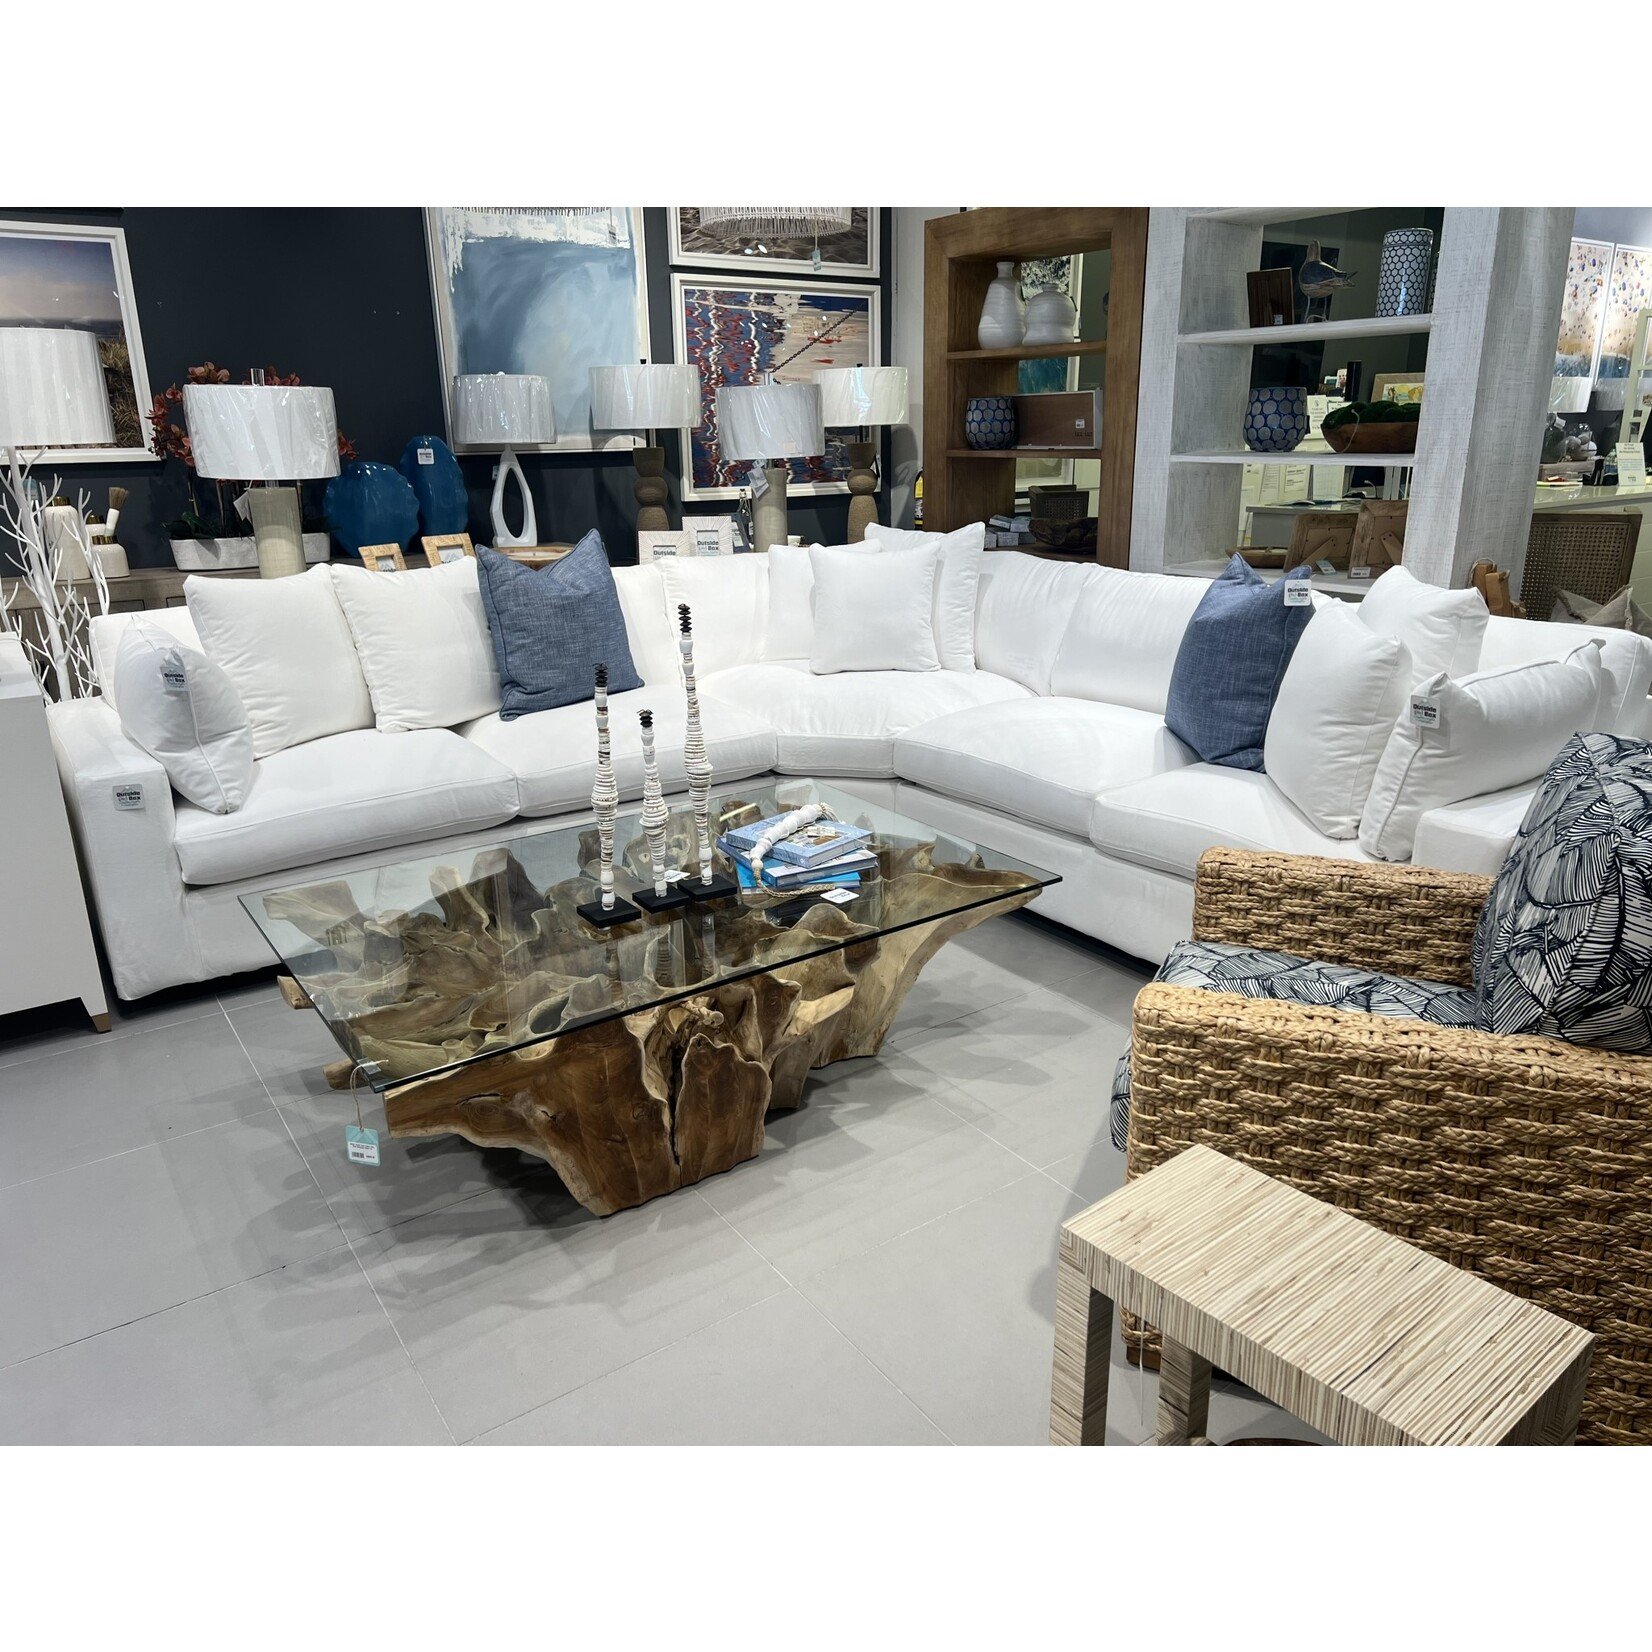 Outside The Box 123x37x123 Carlton Topsider White Performance Fabric Slipcover Tucked Under Trillium Sectional